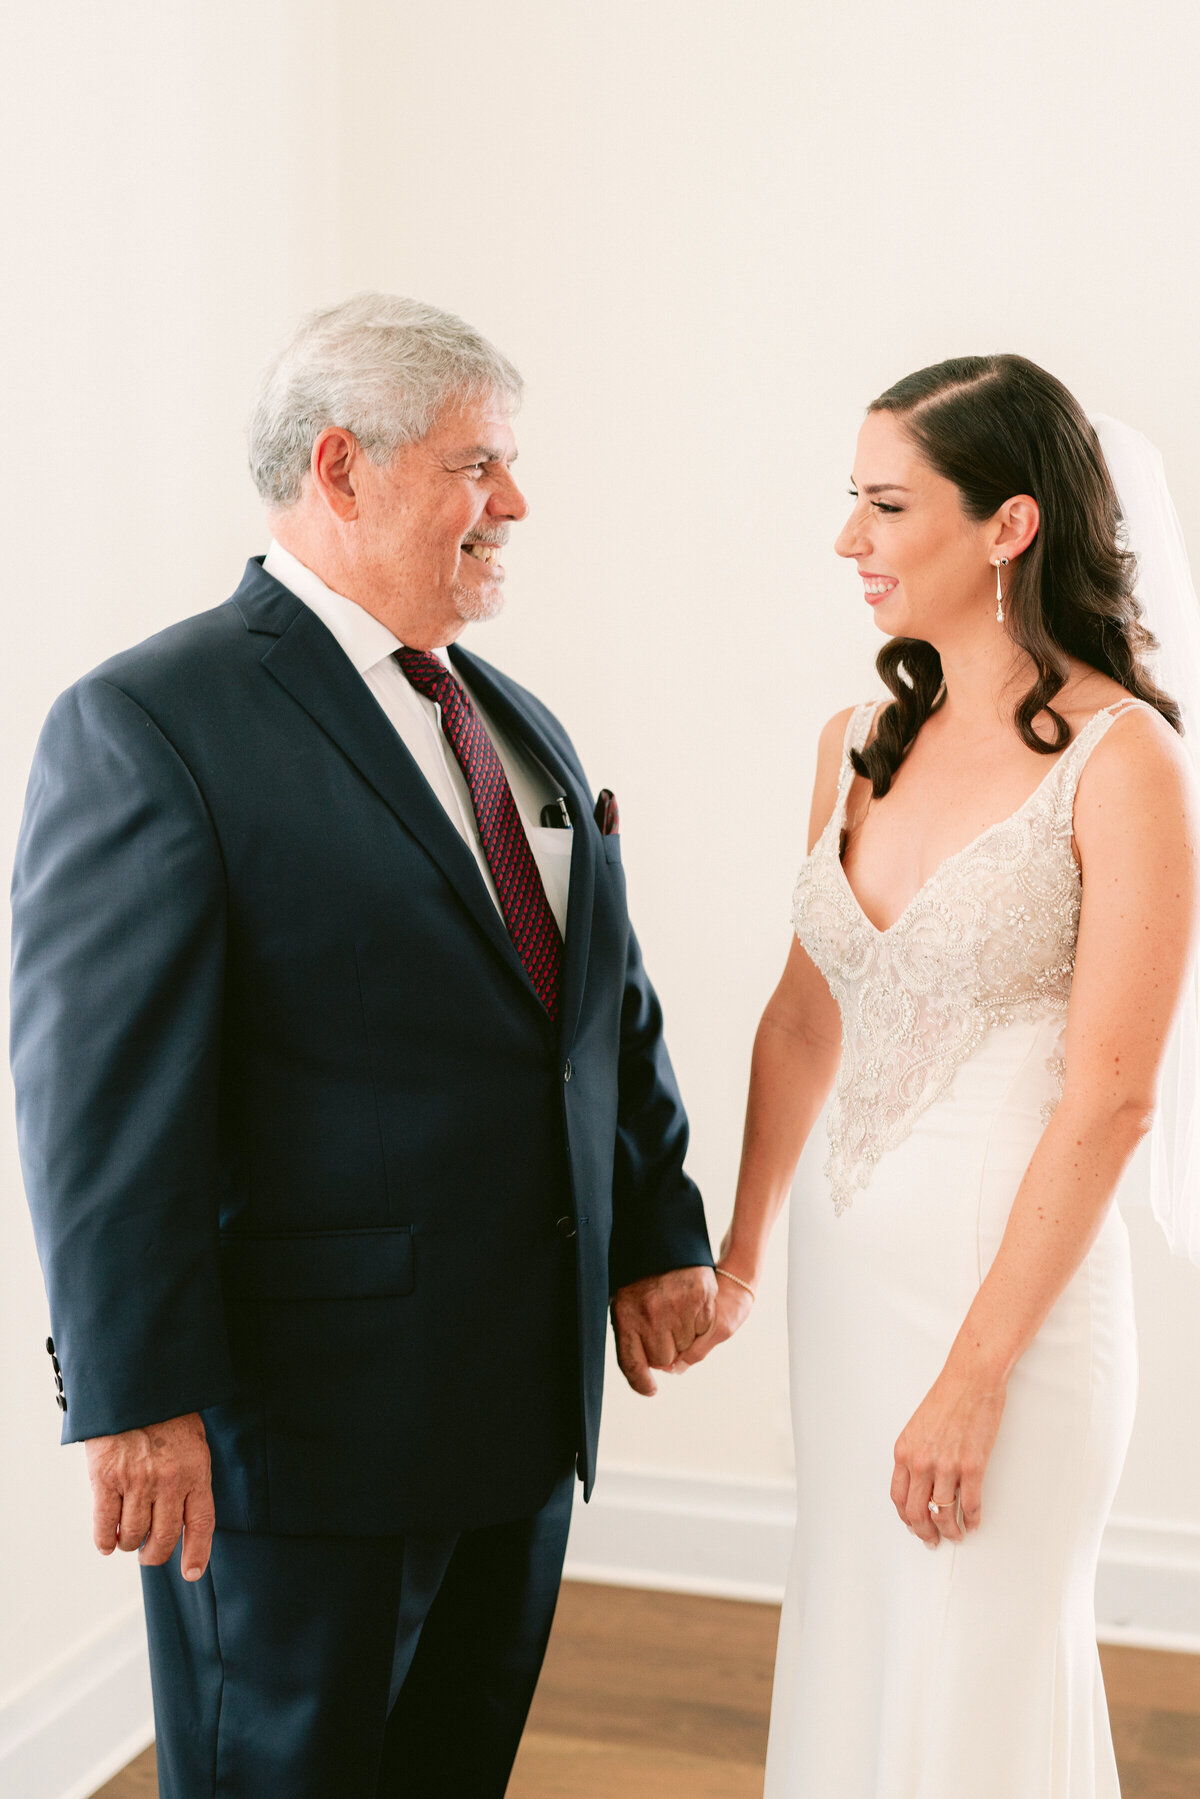 Bride first look with father at The Grand Lady wedding venue Austin